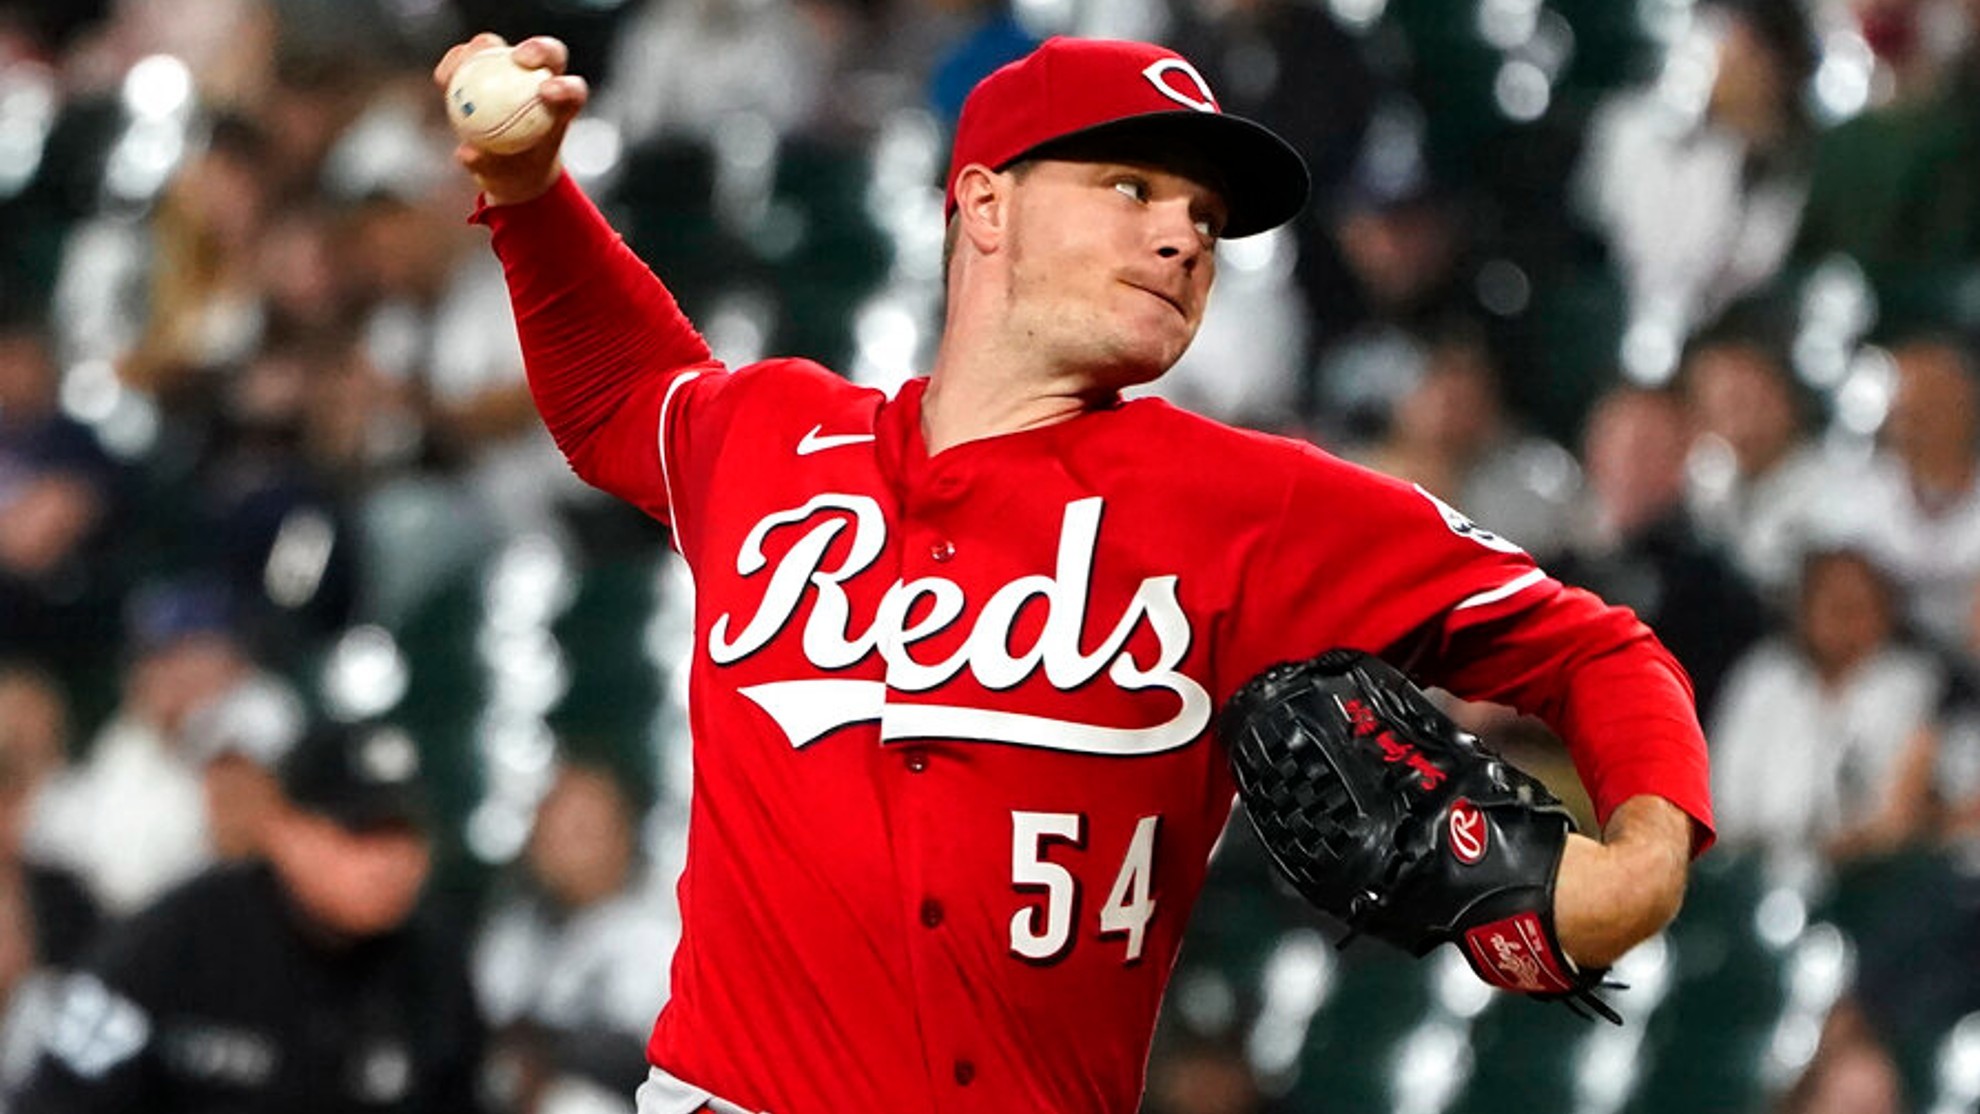 Sonny Gray and Francis Peguero are traded from the Cincinnati Reds to the Minnesota Twins